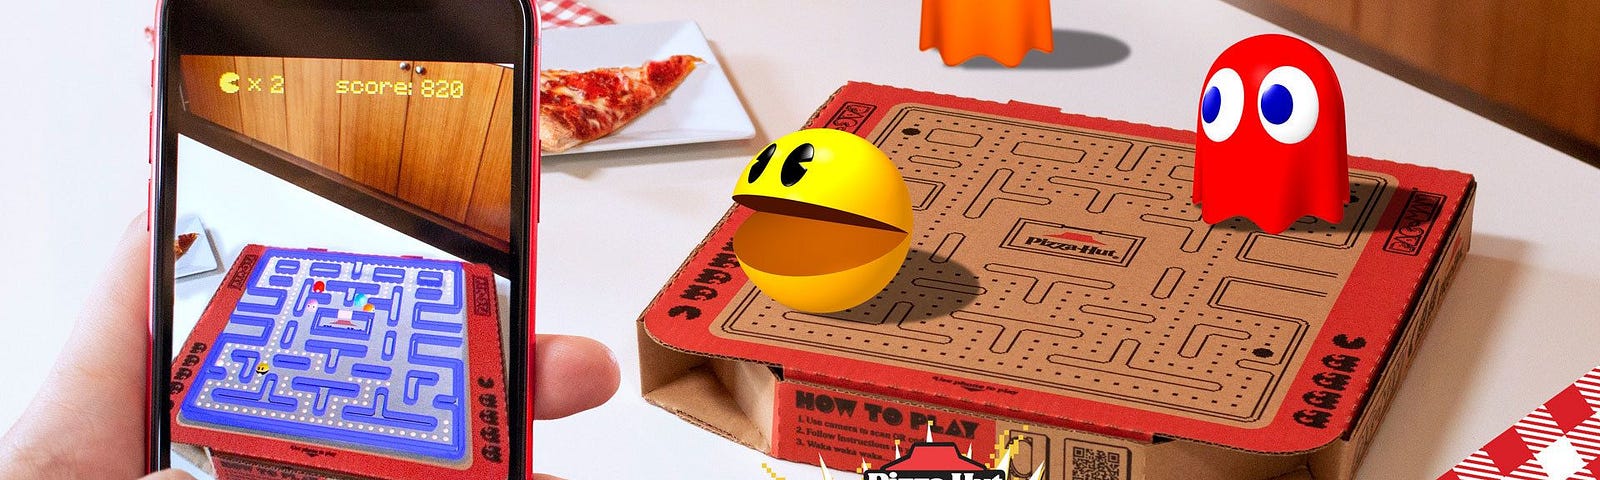 A demonstration of the Pizza Hut augmented reality pizza box, featuring Pac-Man.